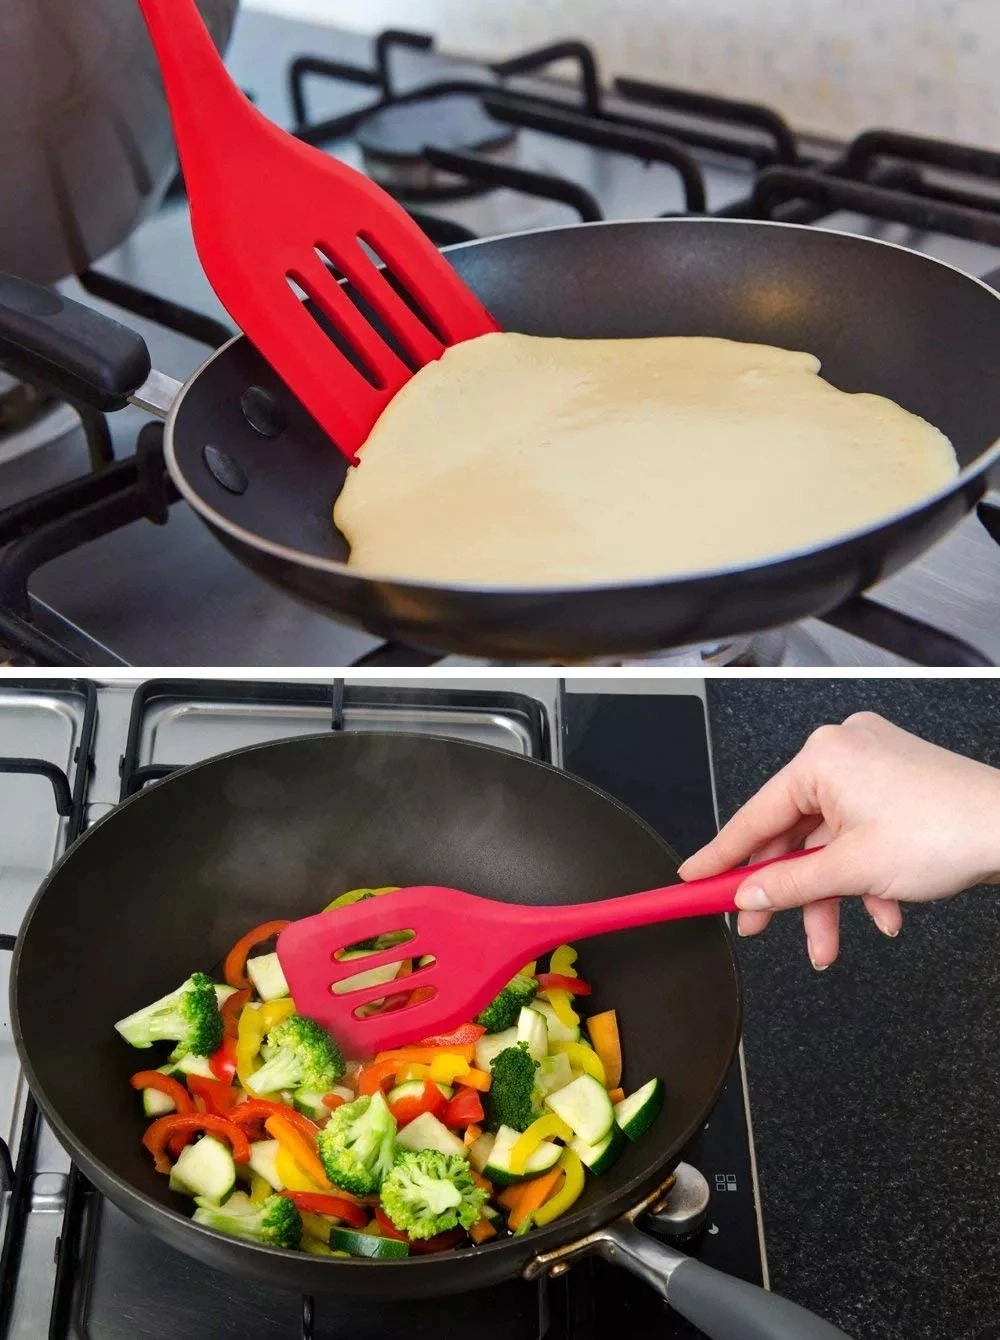 Kitchen Accessories Traditional Red Color Spoon Silicone Non-Stick Cooking Kitchen Utensil Set